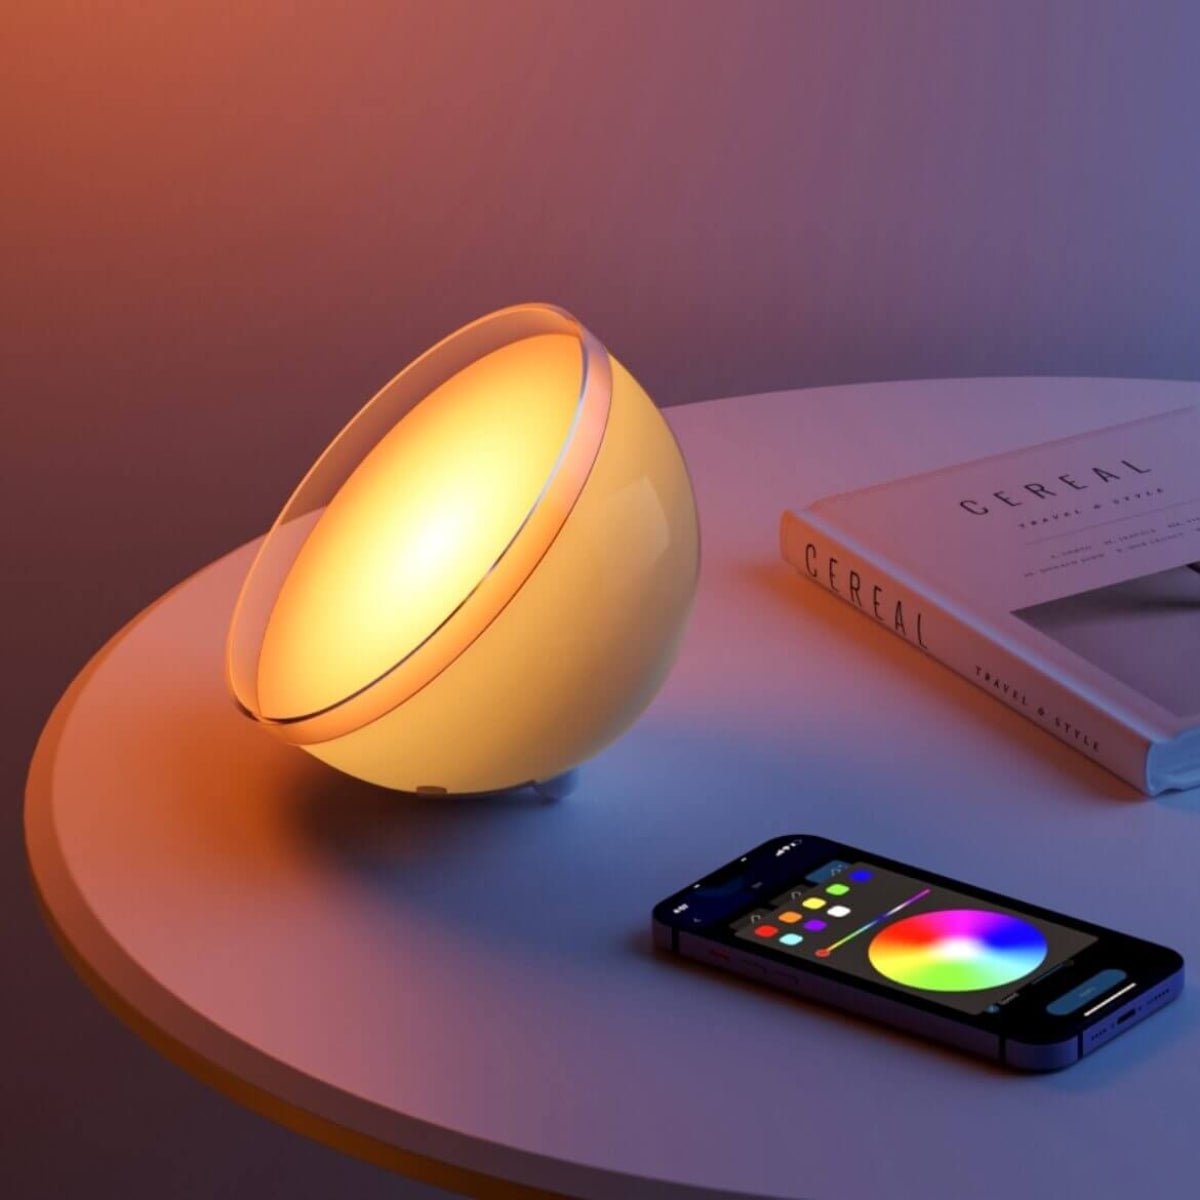 Govee Ambient RGBWW Portable Table Lamp - Store 974 | ستور ٩٧٤